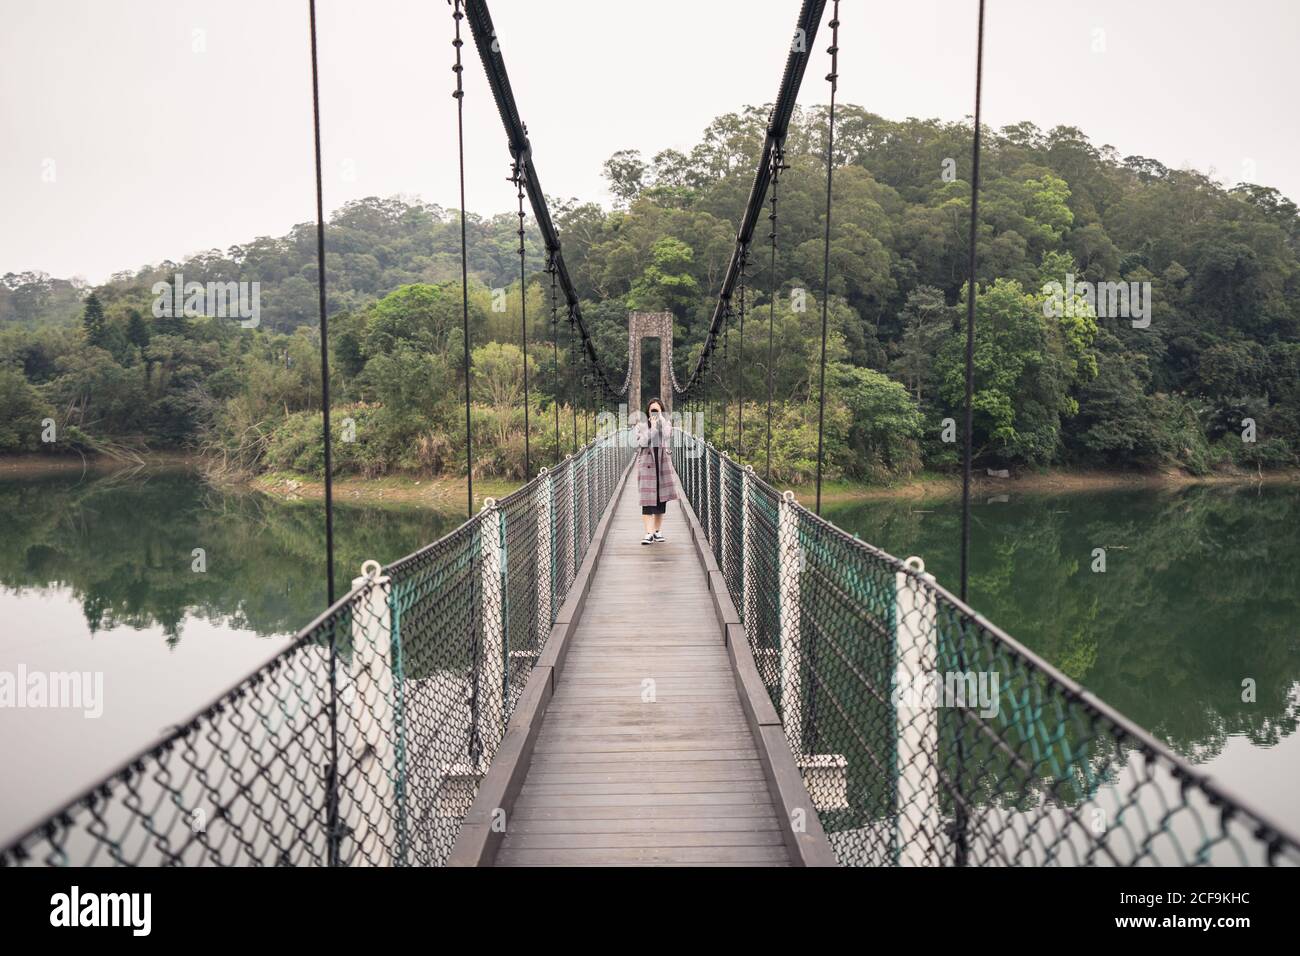 Female traveler in coat taking photo with photo camera while standing on wooden suspension bridge with metal fence over lake near green forest Stock Photo